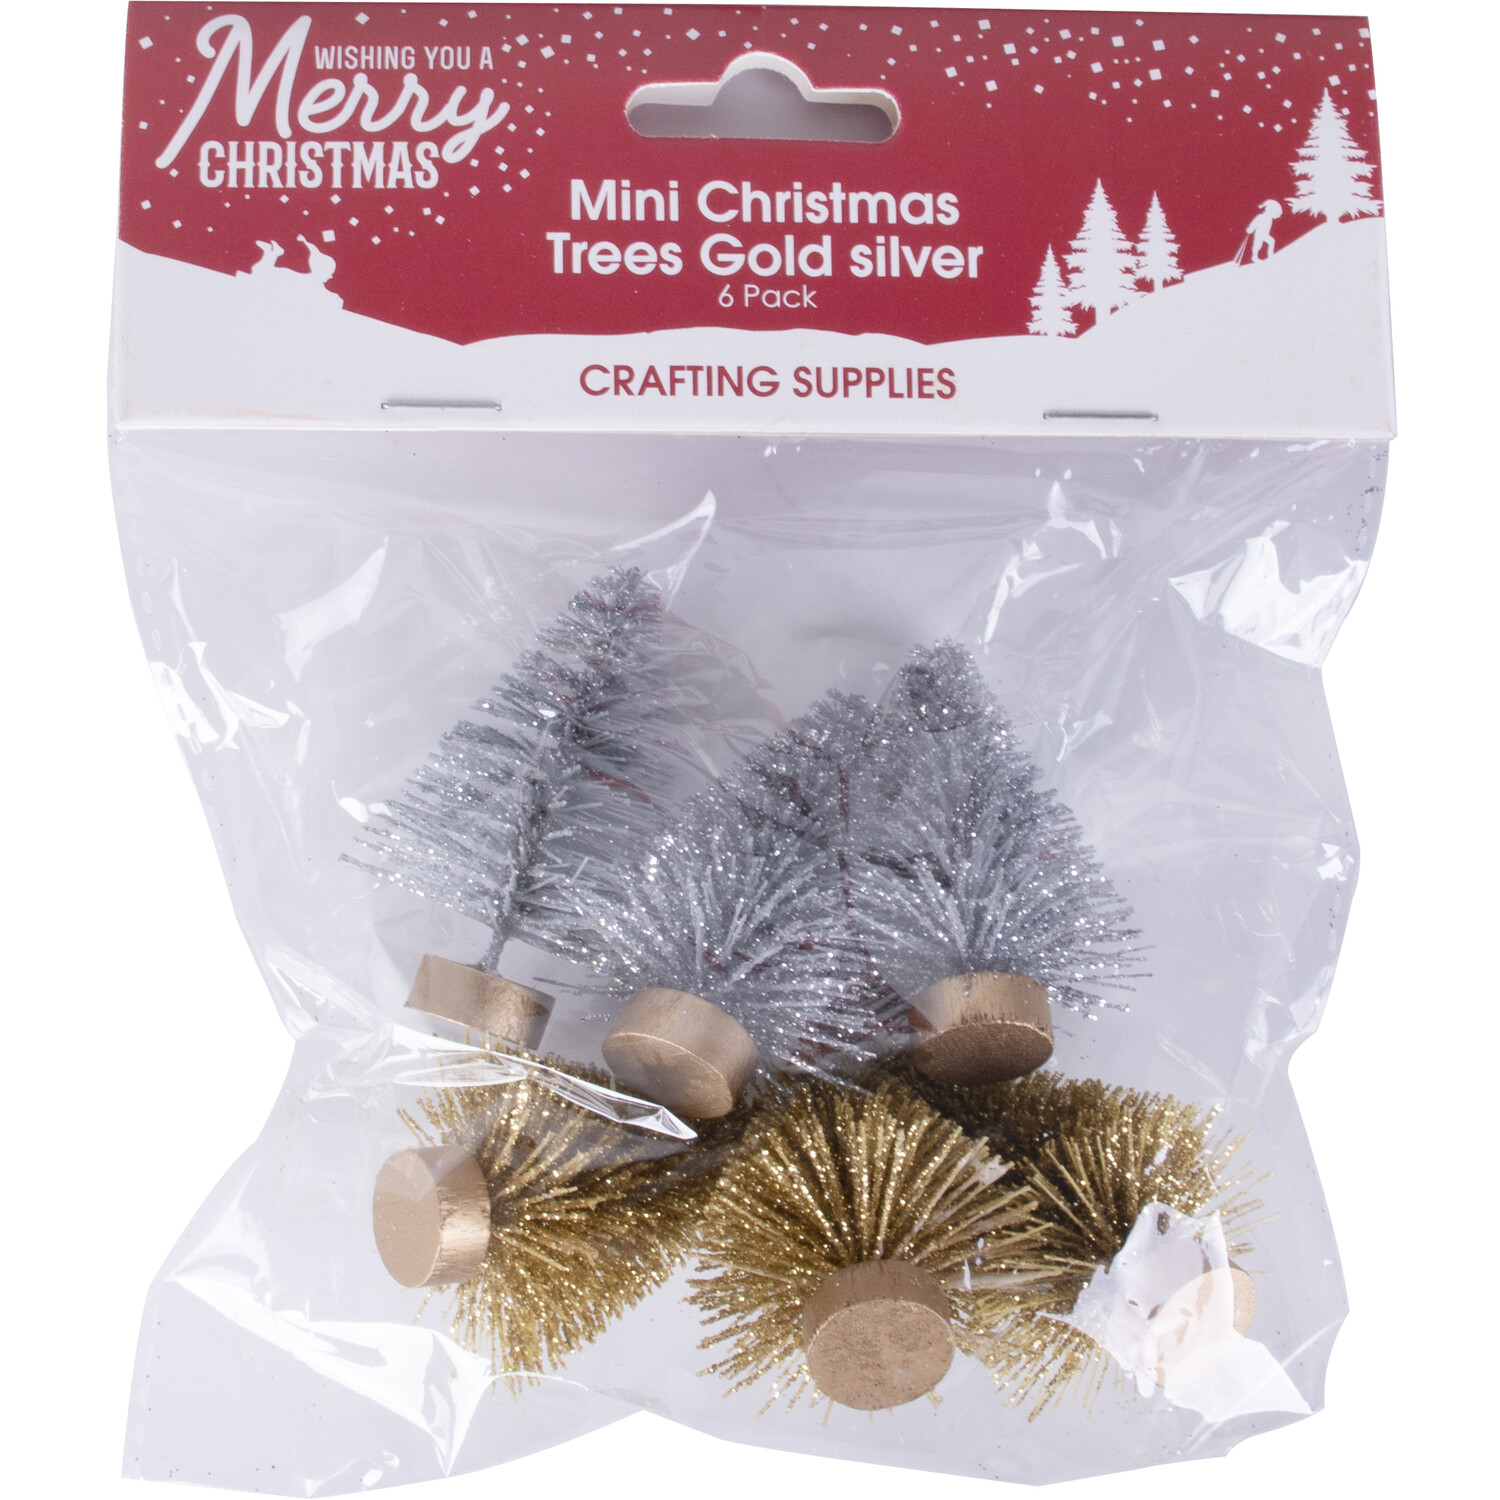 Pack of 6 Miniature Craft Trees - Silver and Gold Image